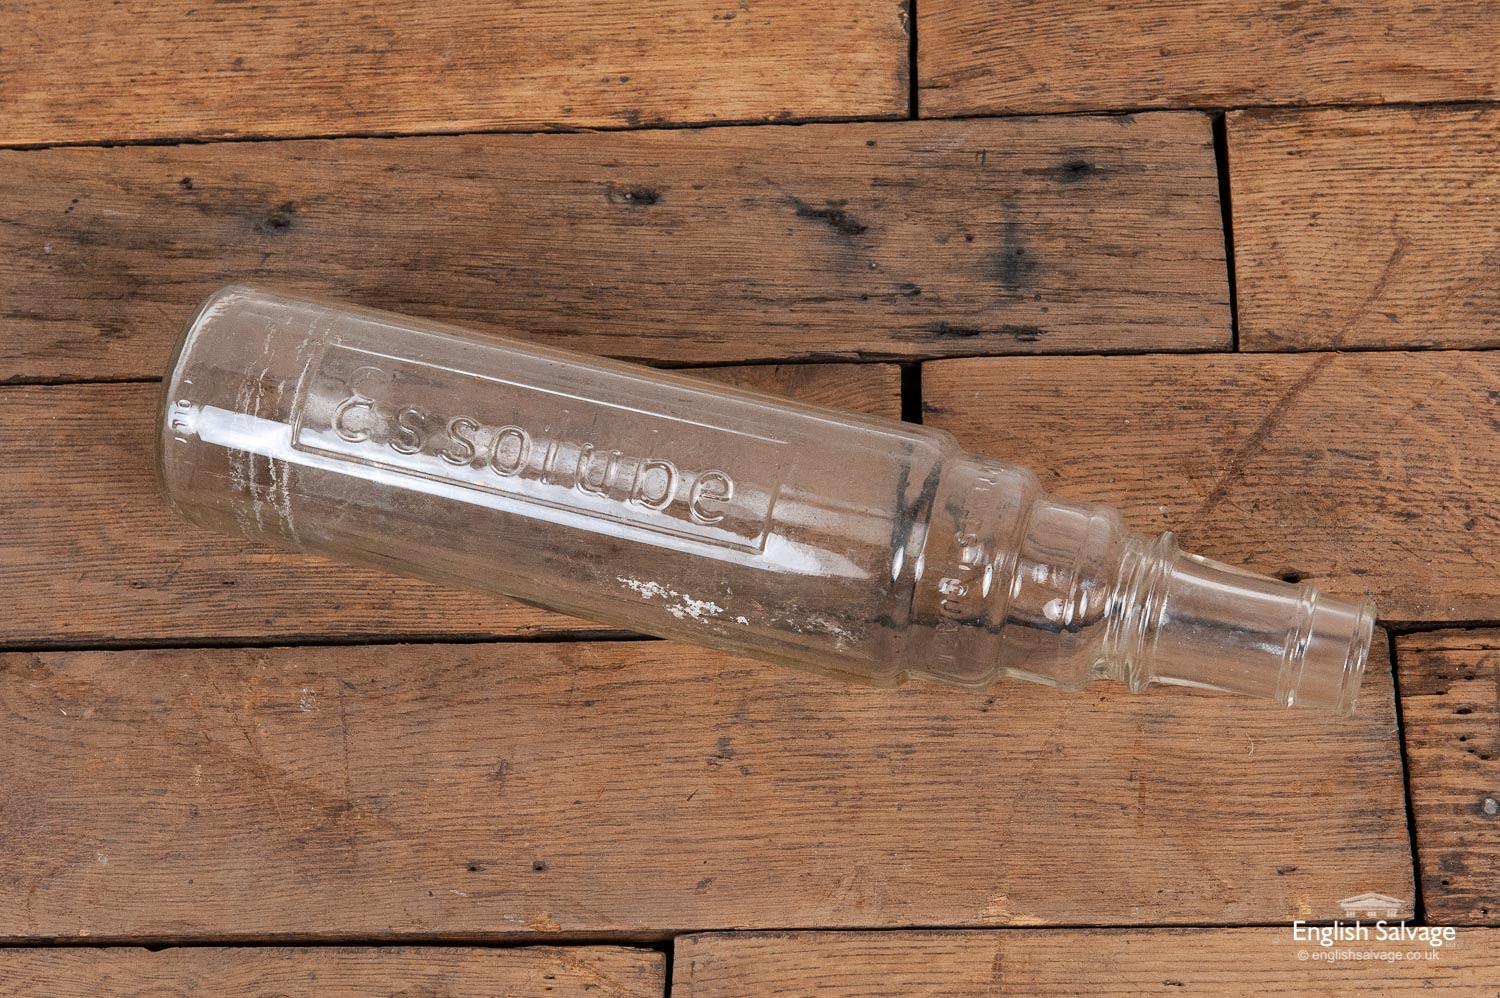 Large and tall 1 Quart Essolube glass bottle. Great piece of vintage automobilia for the collector or would make a great display item in a garage or workshop. Some marks to the inside commensurate with age and use. Base is marked Reg No 781642 K 21